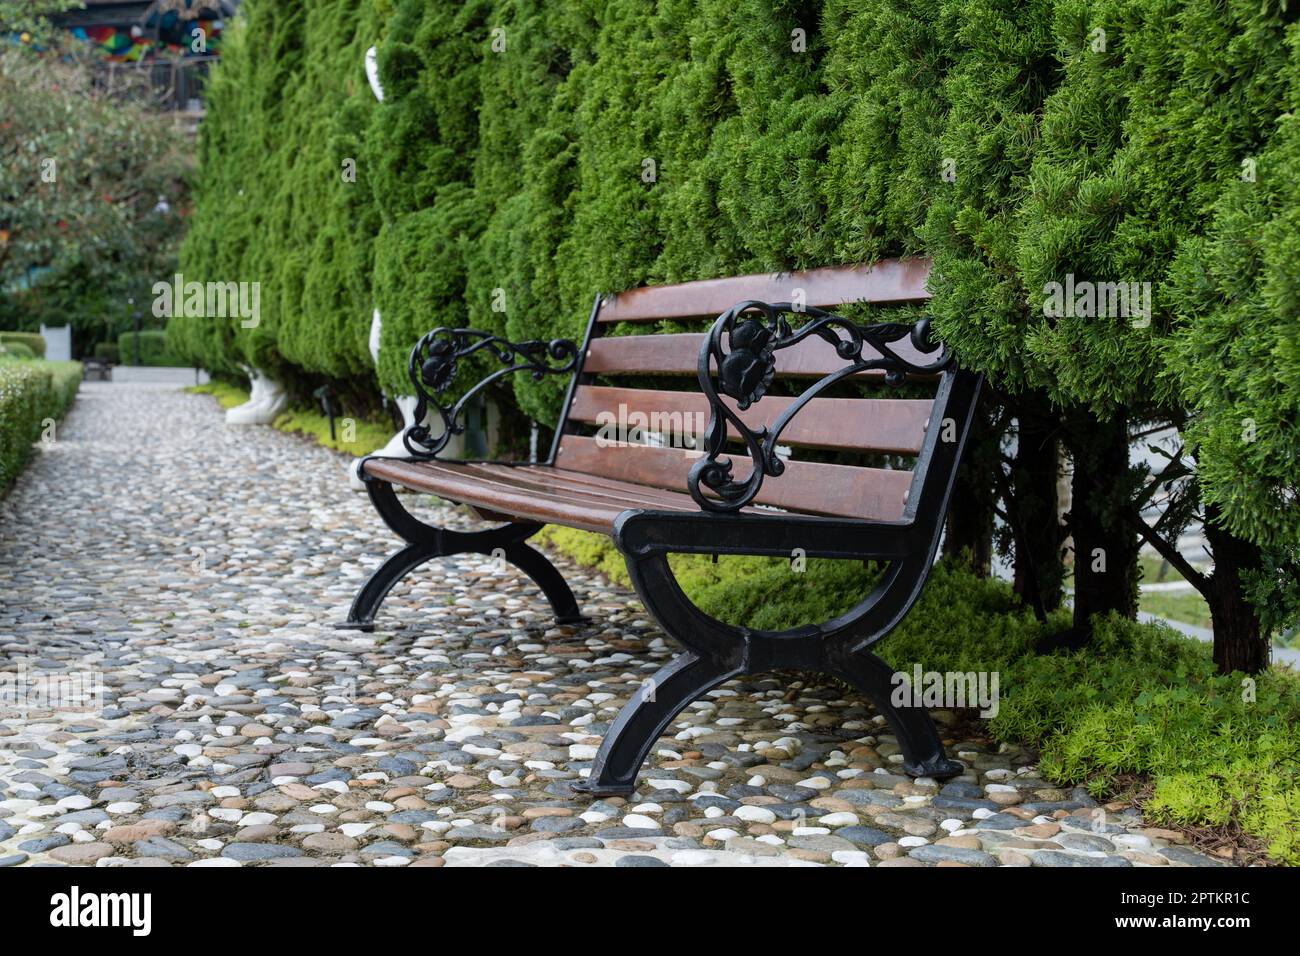 Stylish bench in the spring garden. Bench in city park Stock Photo